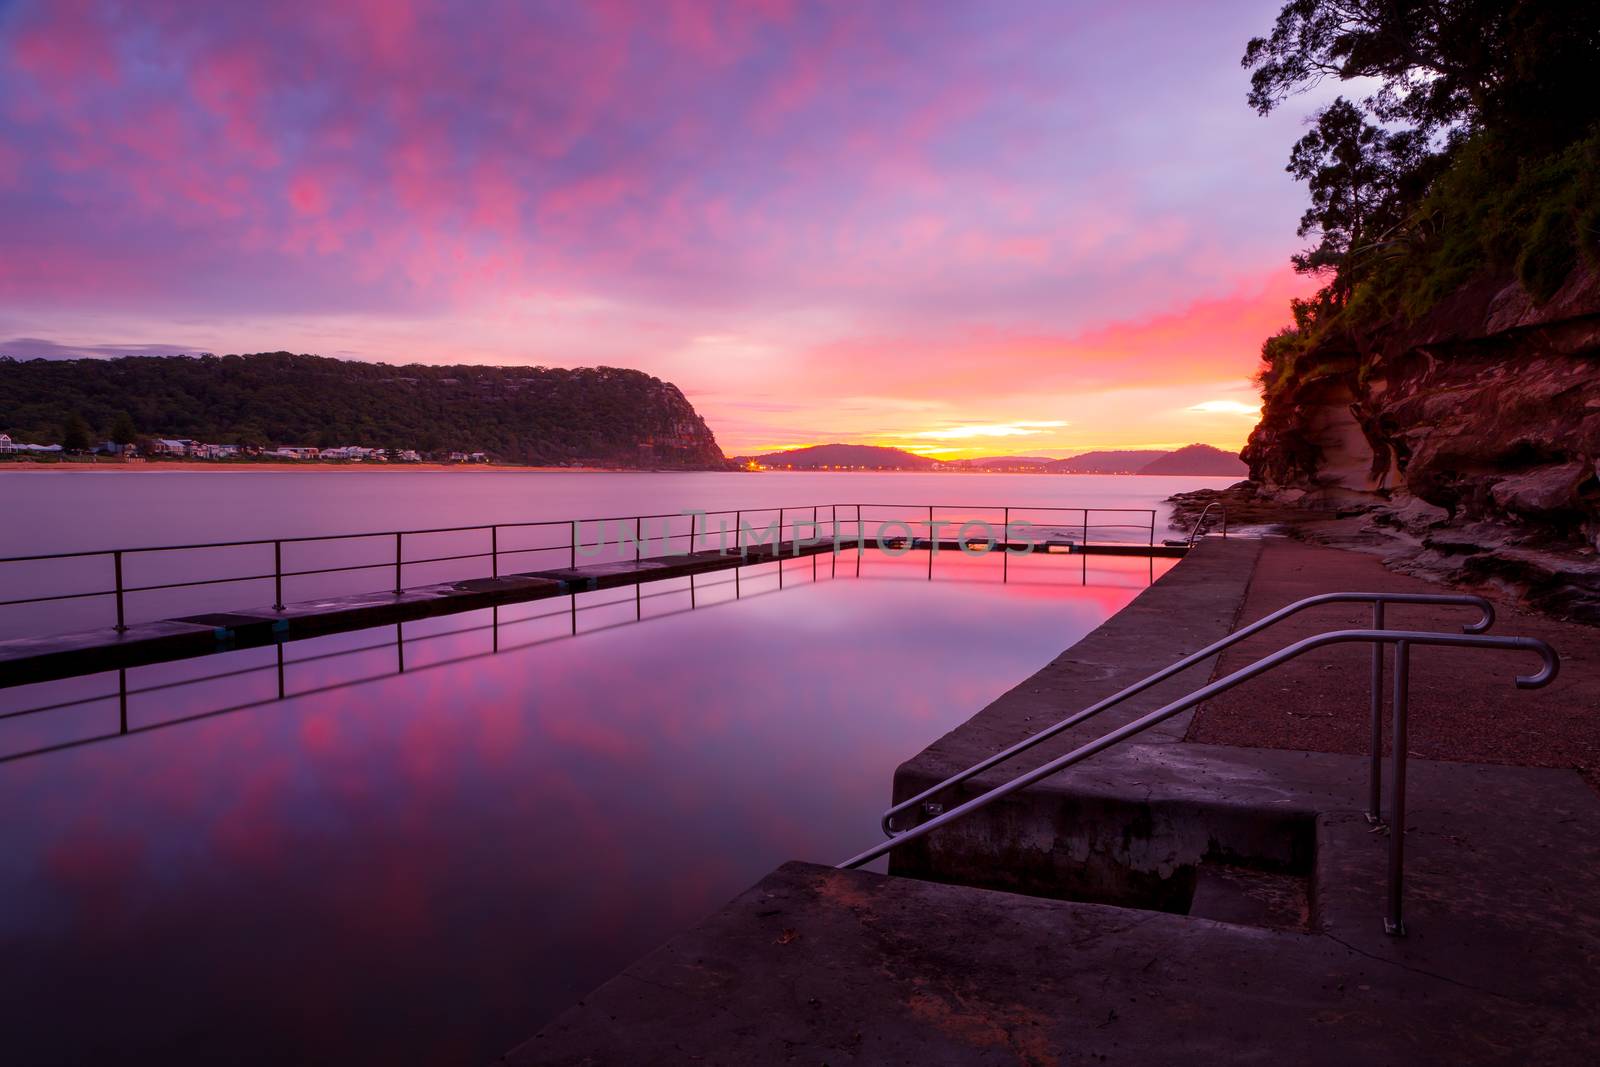 Red and pink dawn skies and beautiful reflections in the still waters of the rock pool